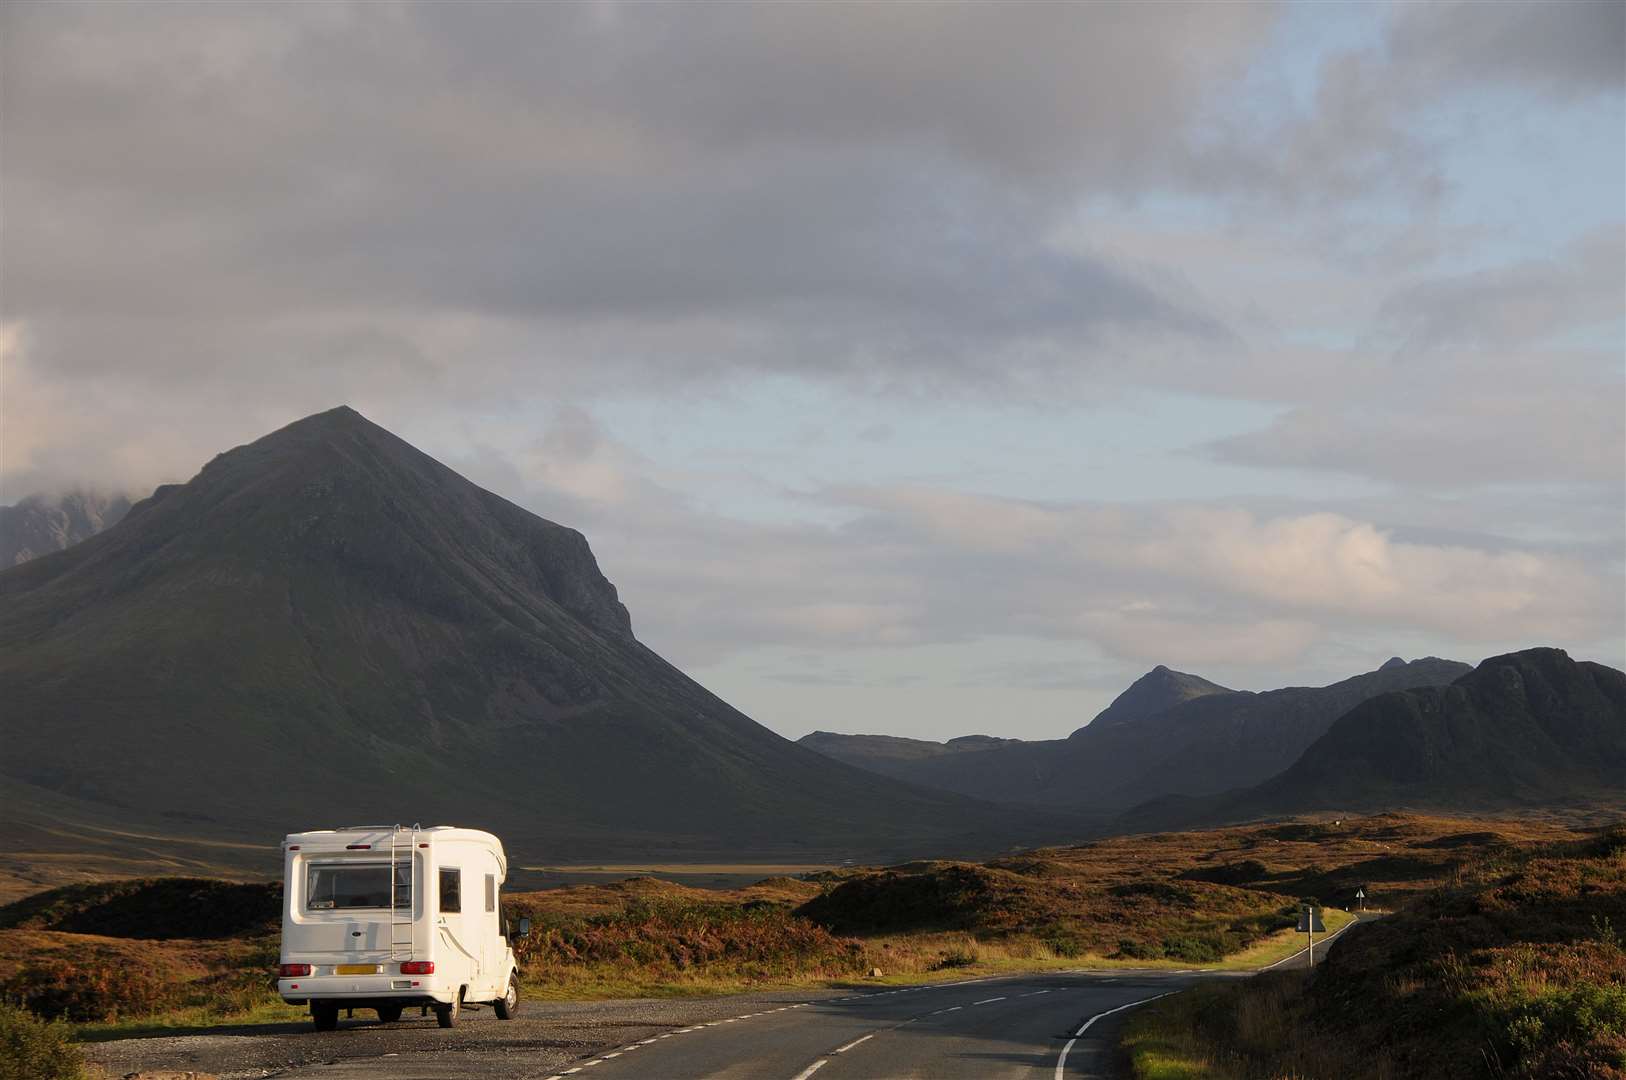 Stunning scenery is on offer but there are limited facilities in many parts of the northern Highlands.